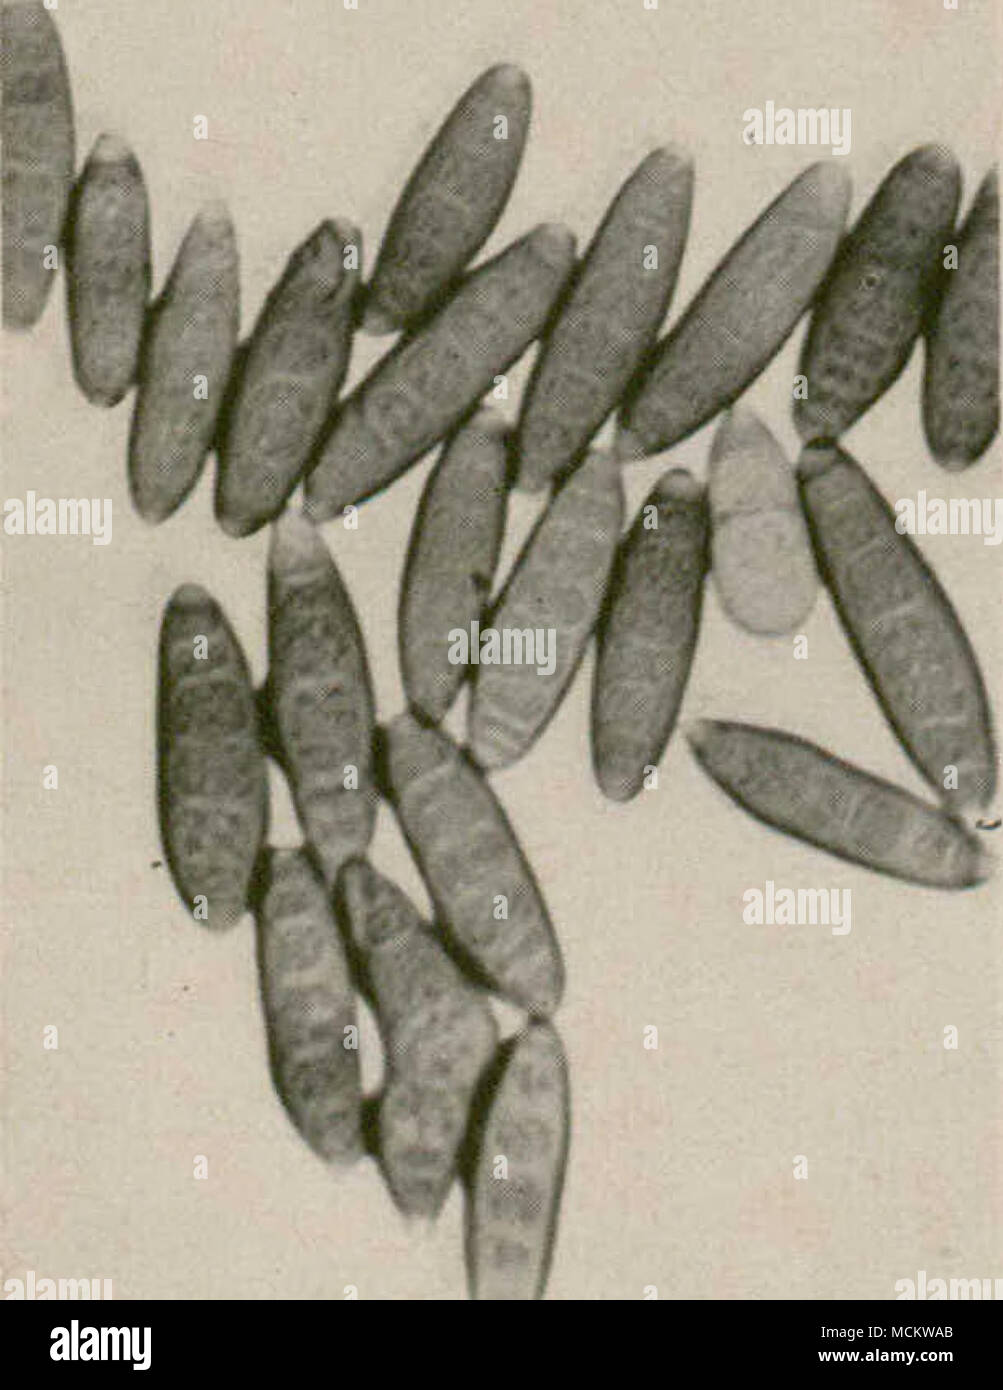 . Figure 3.—Spores of the fungus Helminthosporium .sativum. These spores infect stems, roots and leaves of wheat and barley. Helminthosporium sativum attacks chiefly the roots, the bases of stems, and the leaves of wheat and barley on which are produced its characteristic spores (Fig. 3). These spores survive the winter in the soil and on stubble and cause new infections the following spring. These are only a few examples of the great variety of devices by means of which the fungi adapt their parasitic existence to our growing crop plants. 10 Stock Photo